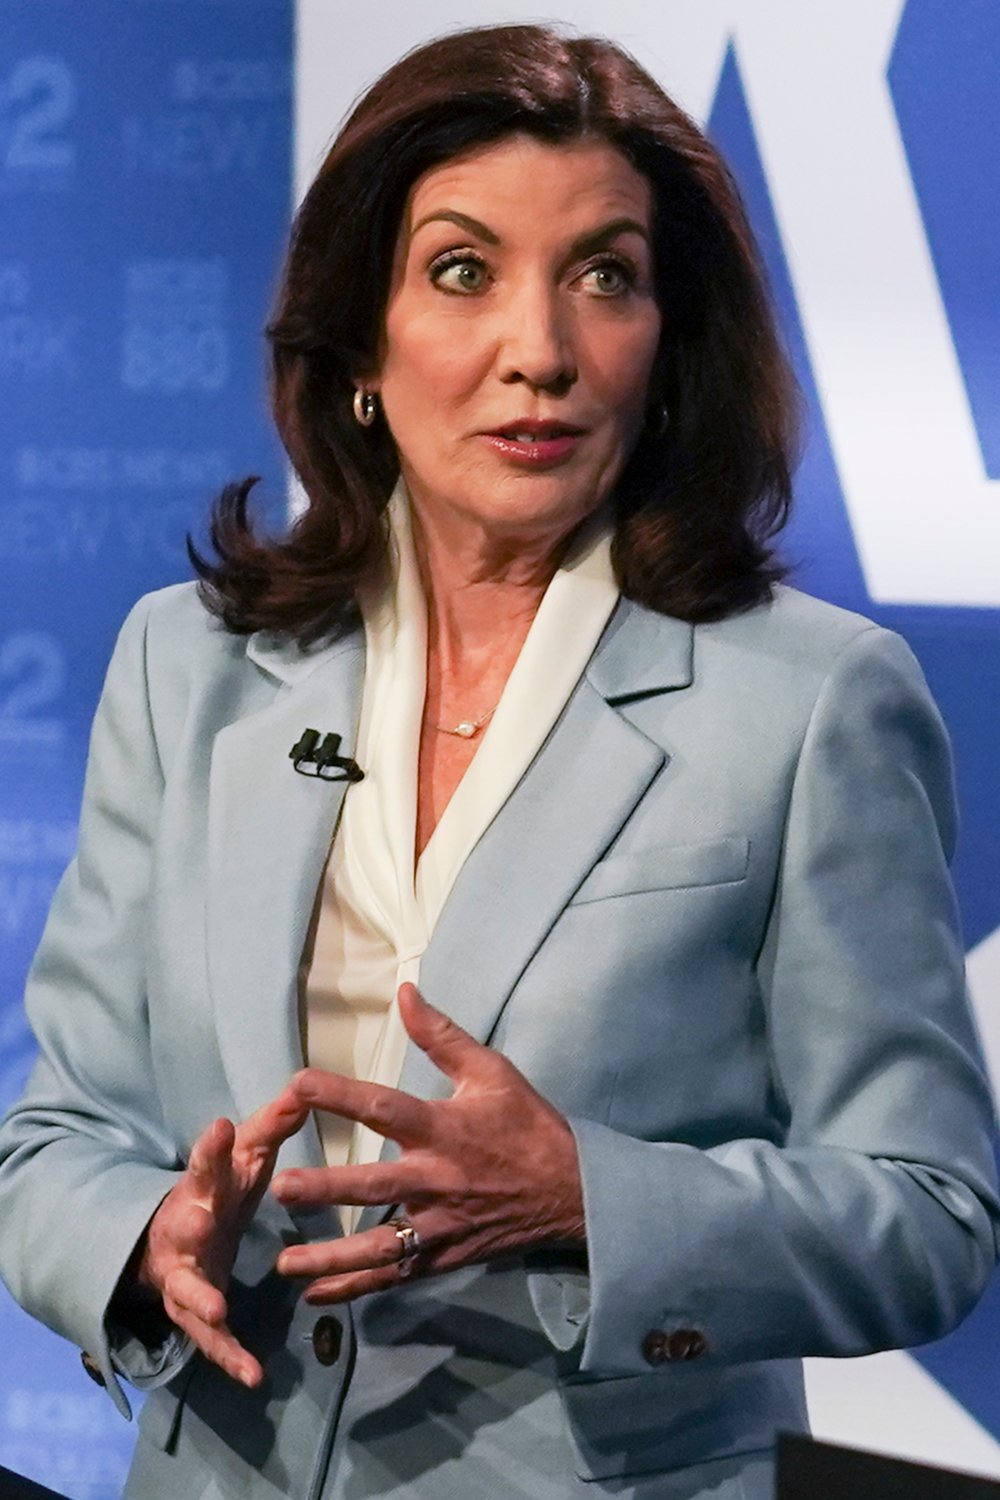 New York Governor Kathy Hochul, speaks during New York's governor primary debate at the studios of WCBS2-TV, Tuesday, June 7, 2022, in New York. (AP Photo/Bebeto Matthews)